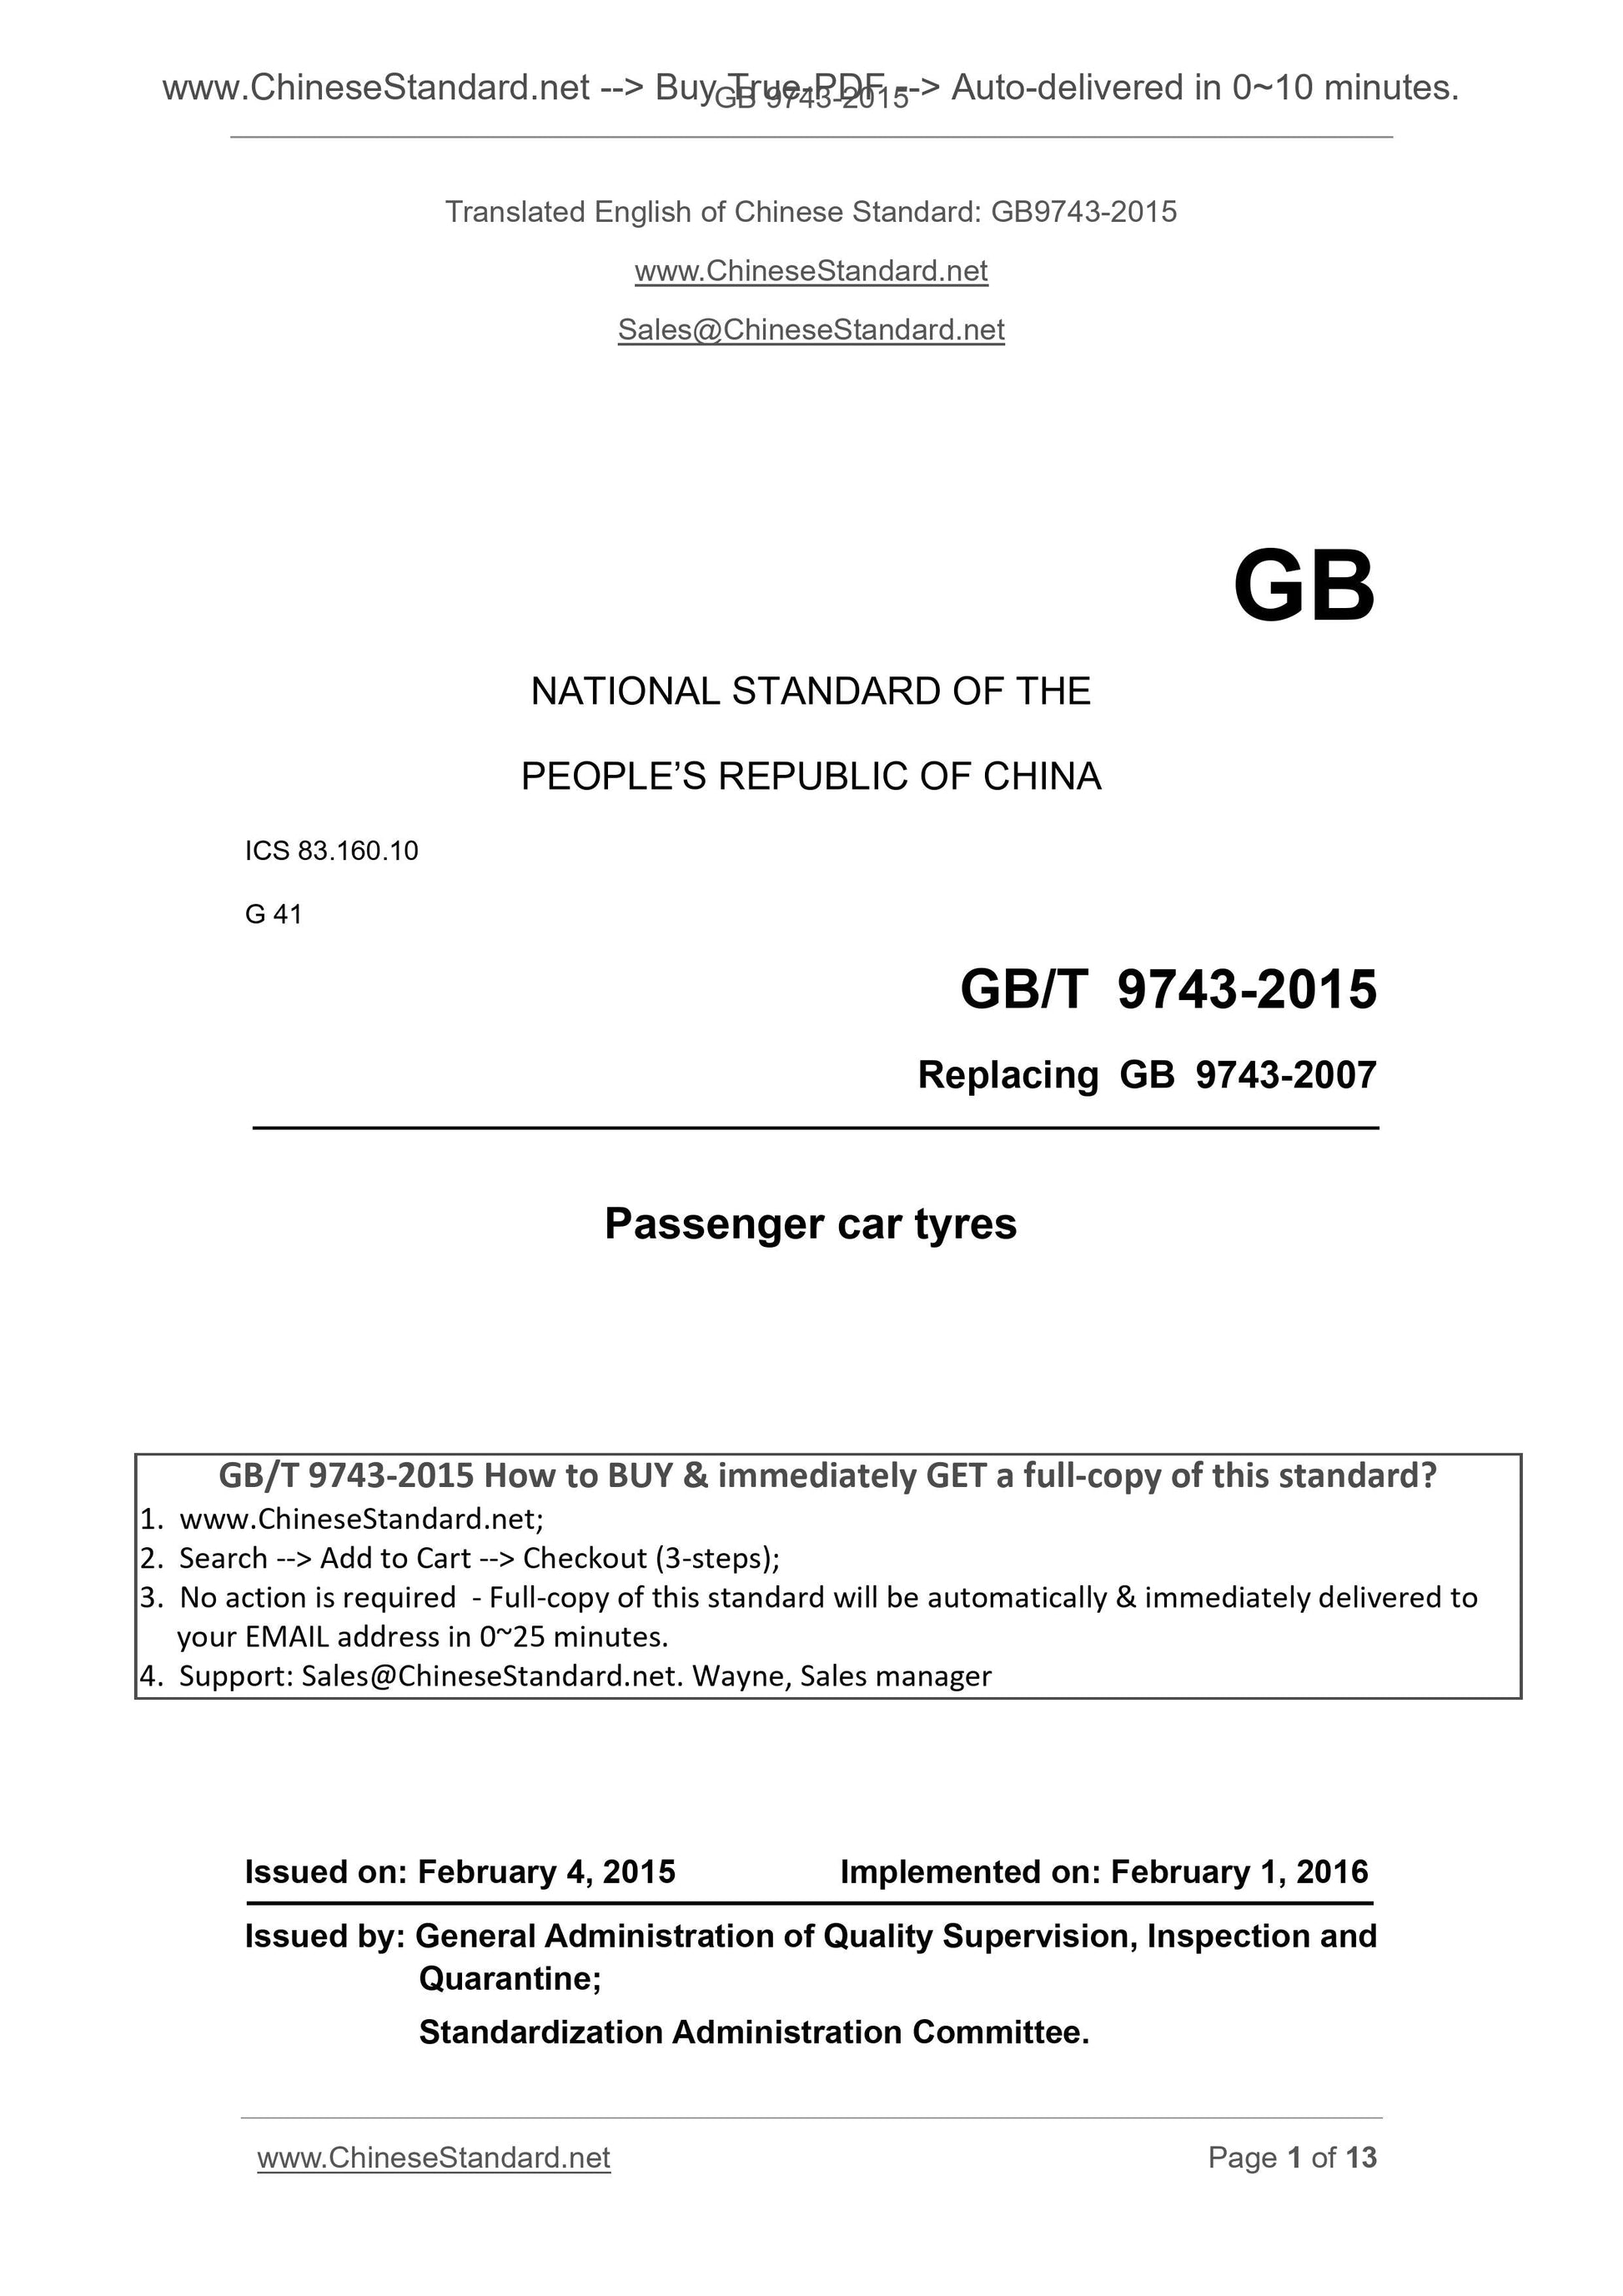 GB 9743-2015 Page 1